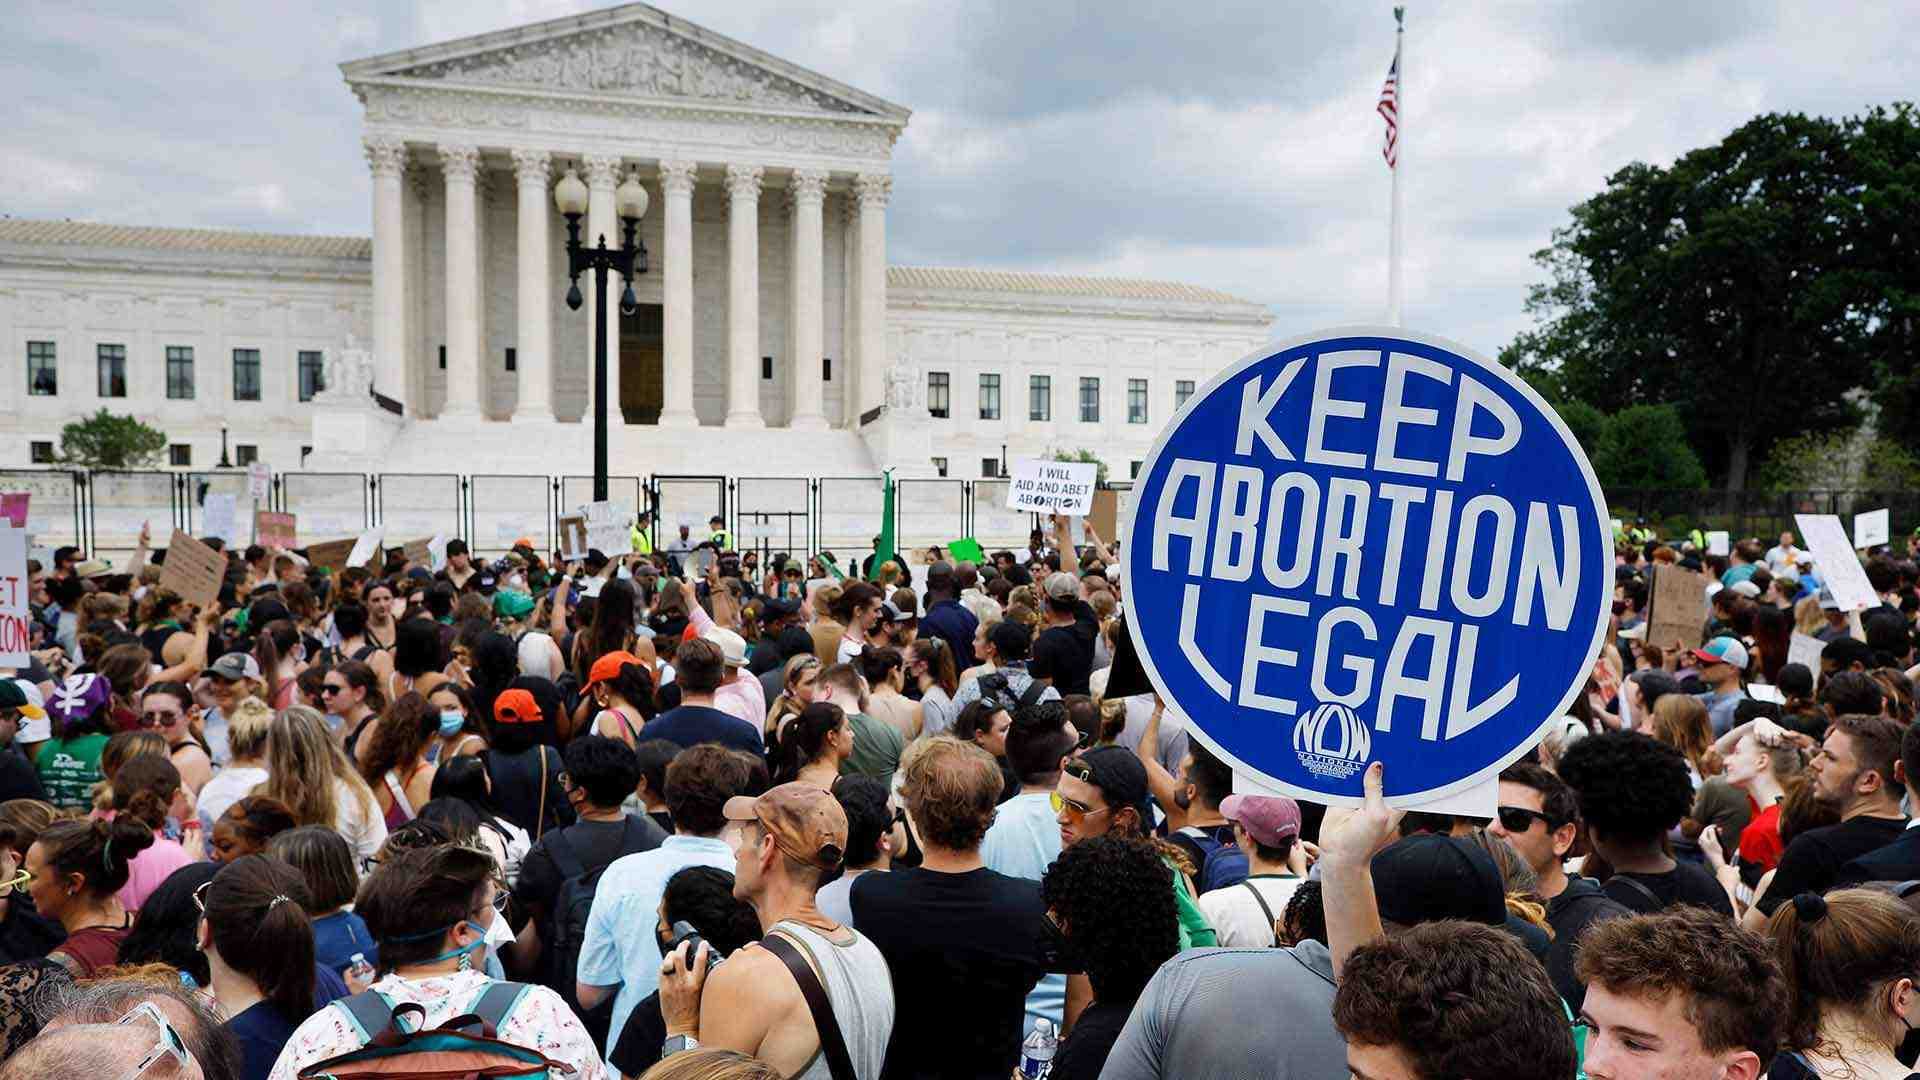 Abortion protesters out side Supreme Court builidng hold up a "keep abortion legal" sign